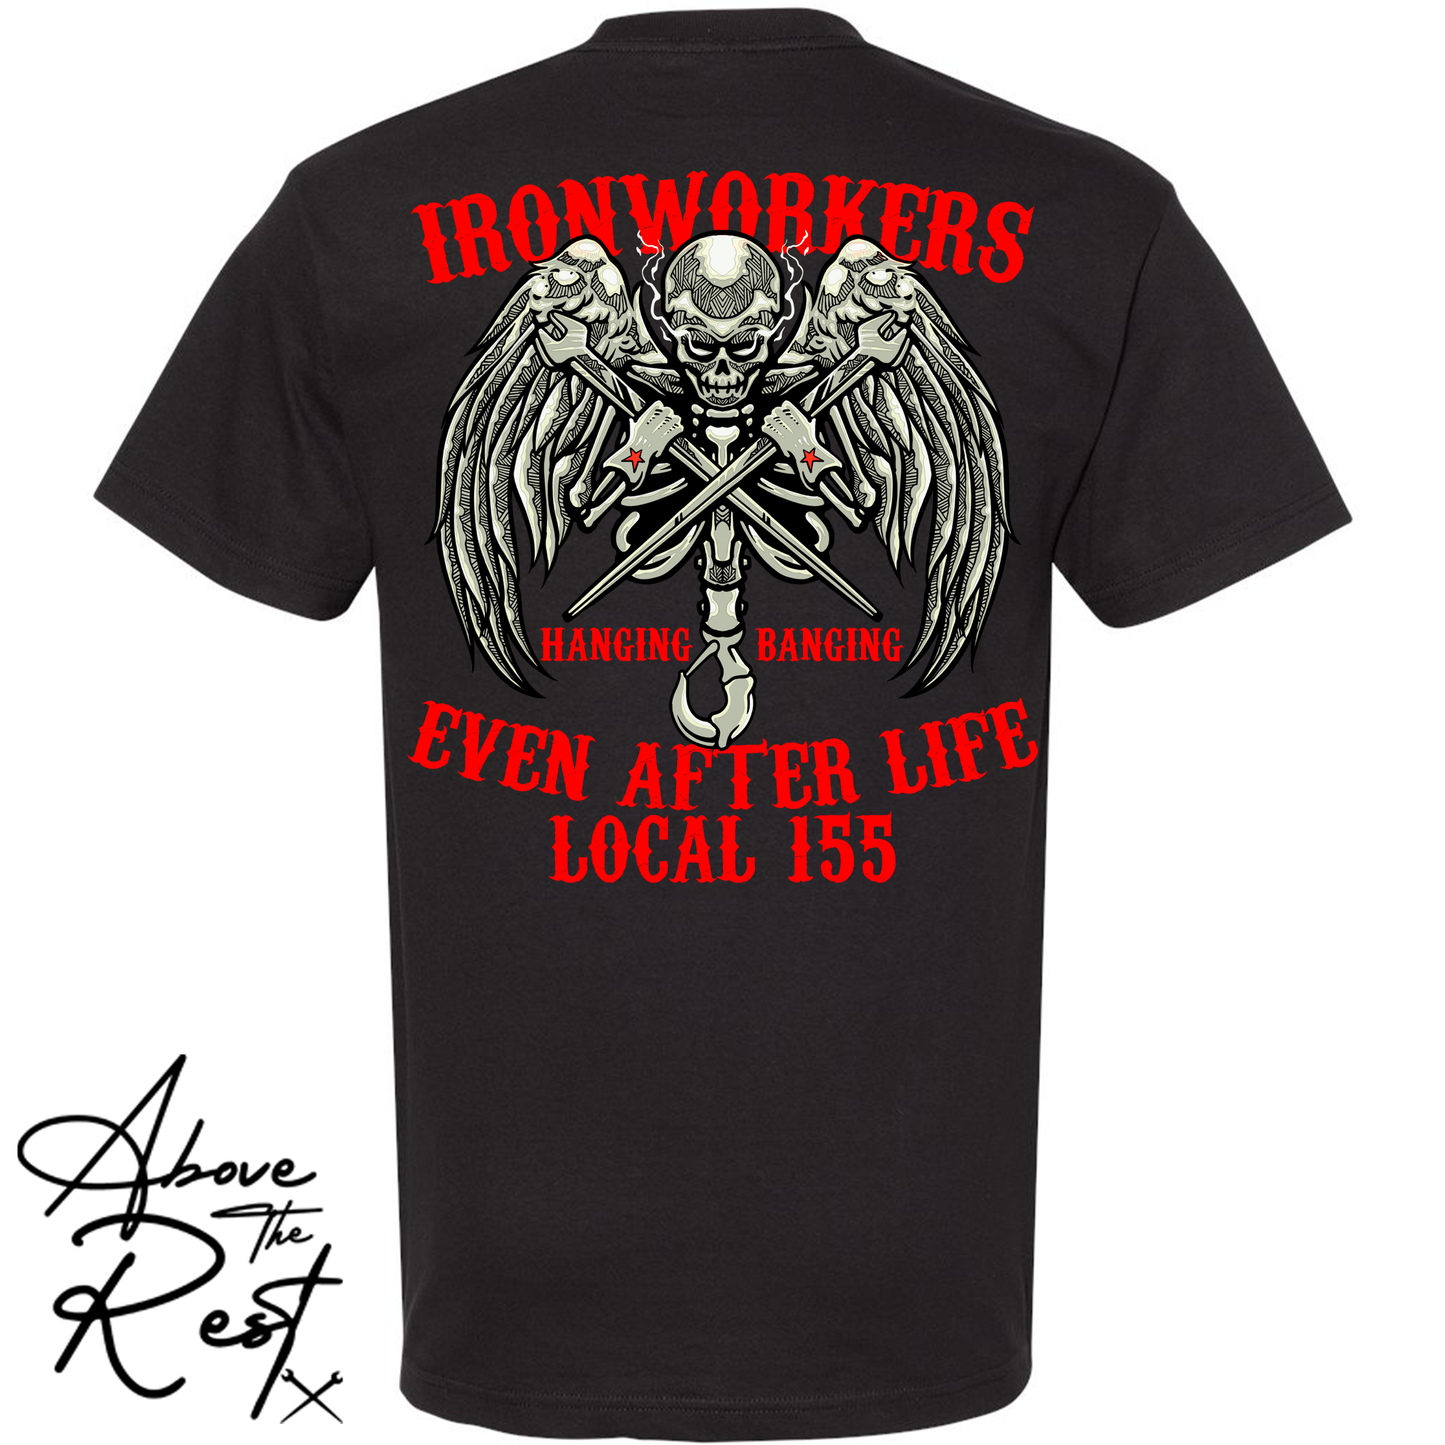 AFTER LIFE T-SHIRT LOCAL 155